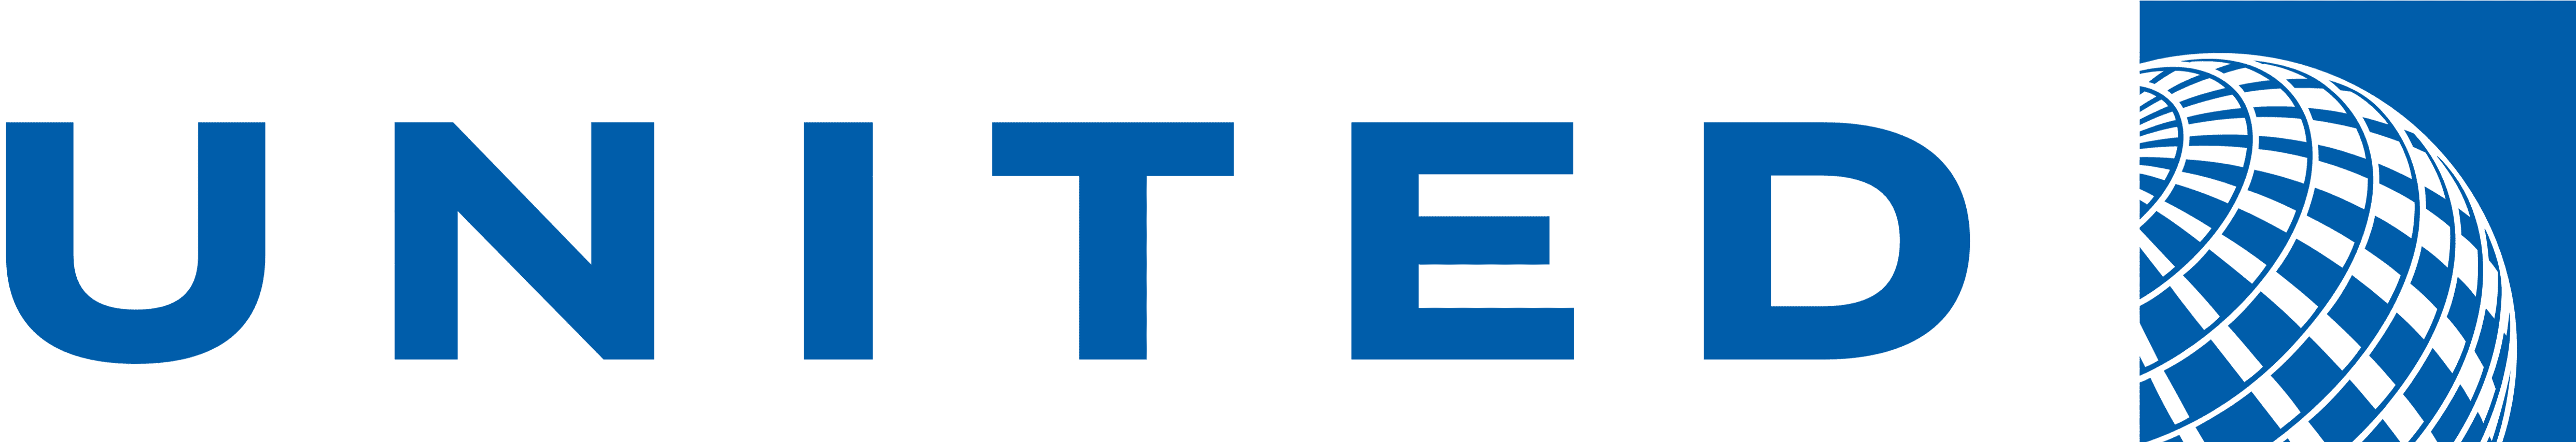 United-Airlines-Logo-2